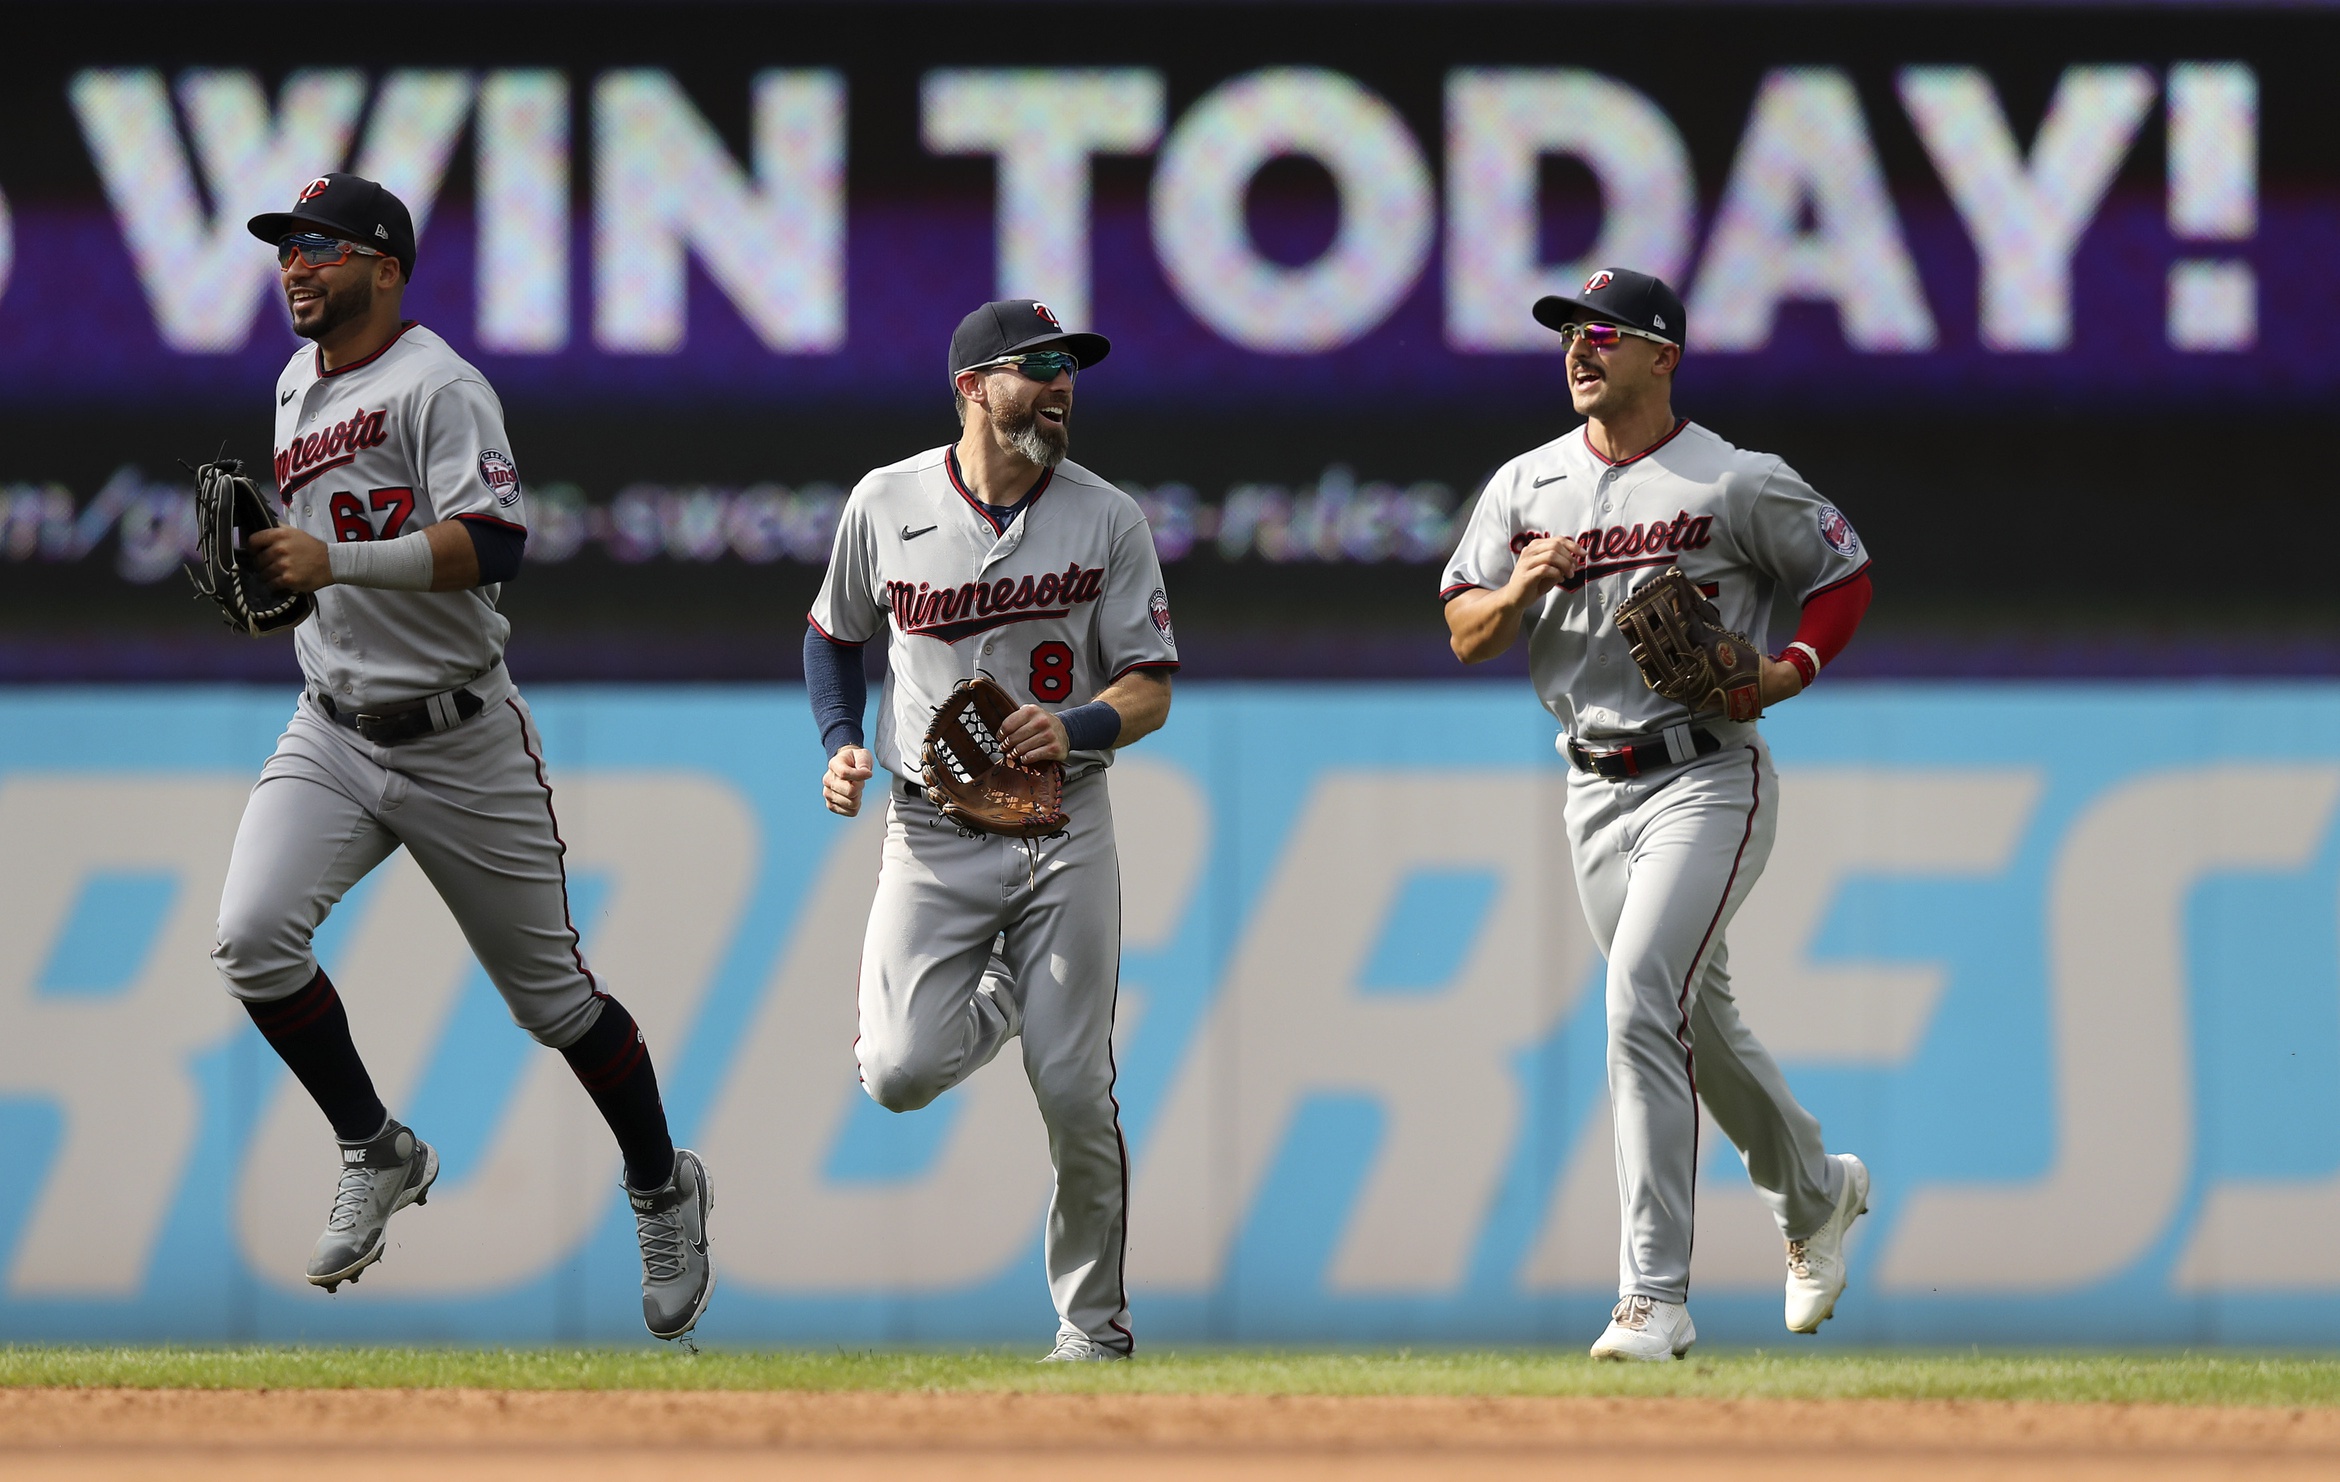 After Sunday win, here's a look at the Twins' playoff chances Sports